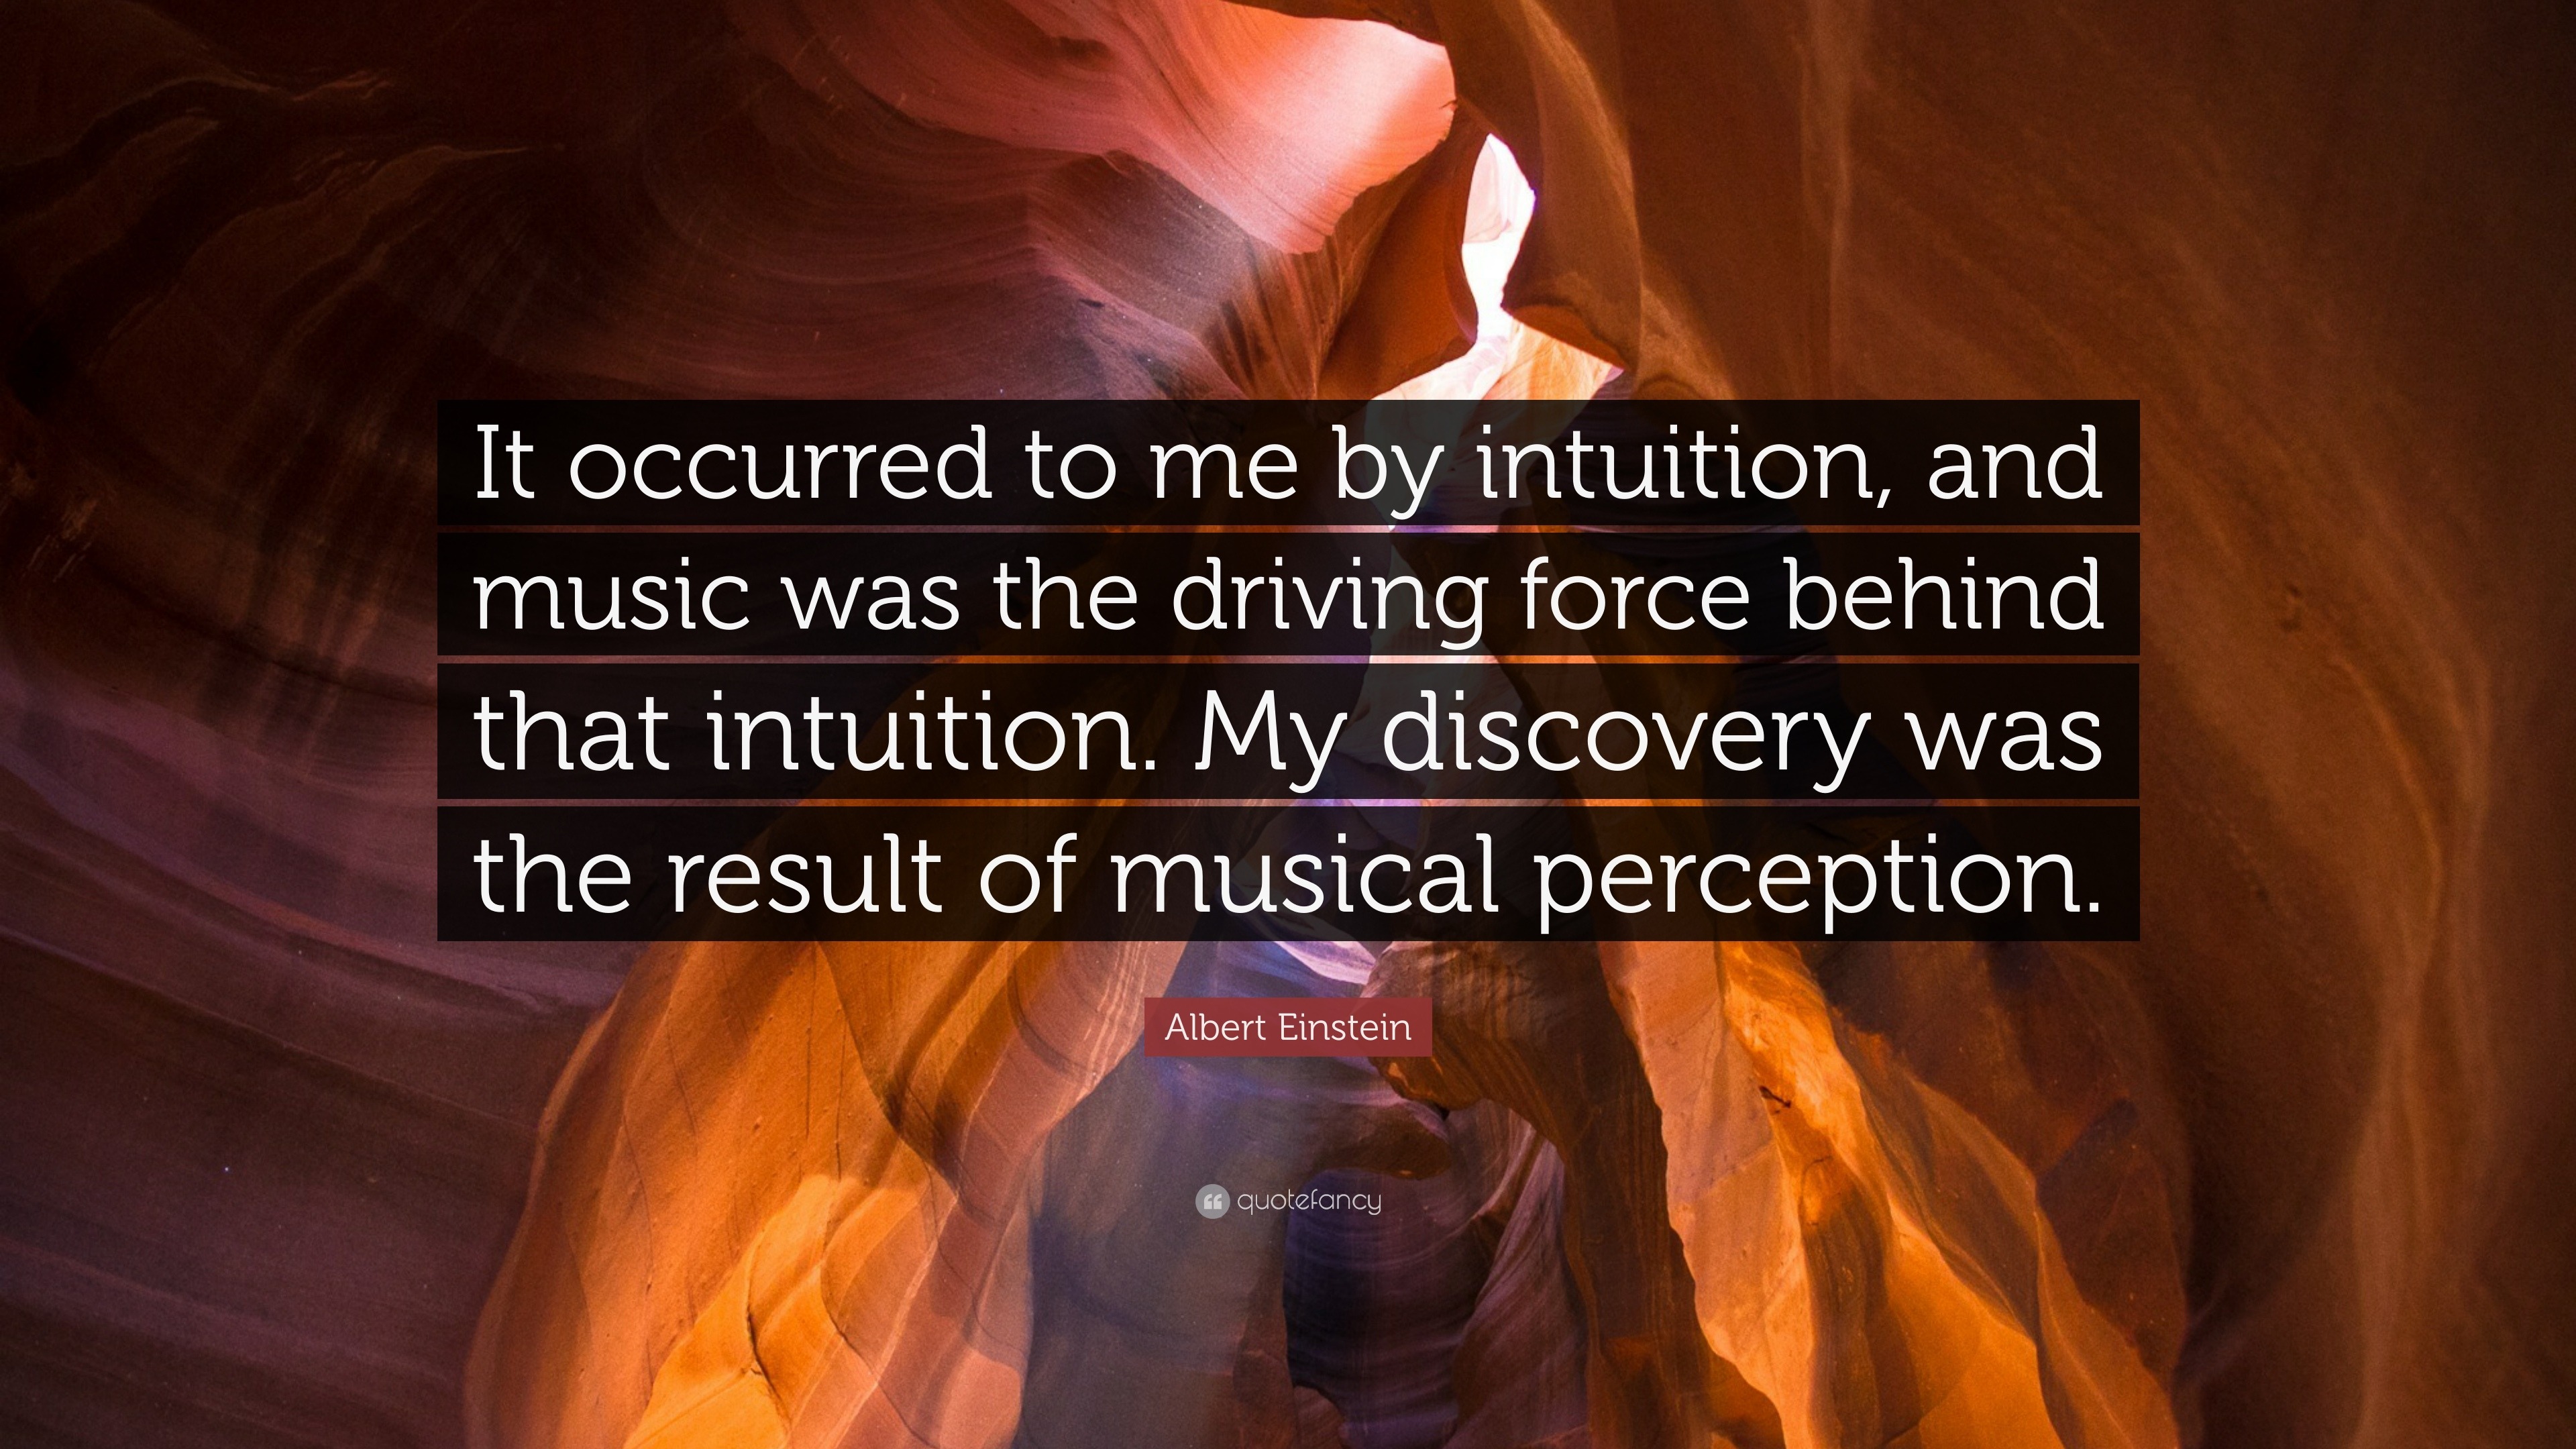 Albert Einstein Quote It Occurred To Me By Intuition And Music Was The Driving Force Behind That Intuition My Discovery Was The Result Of Mu